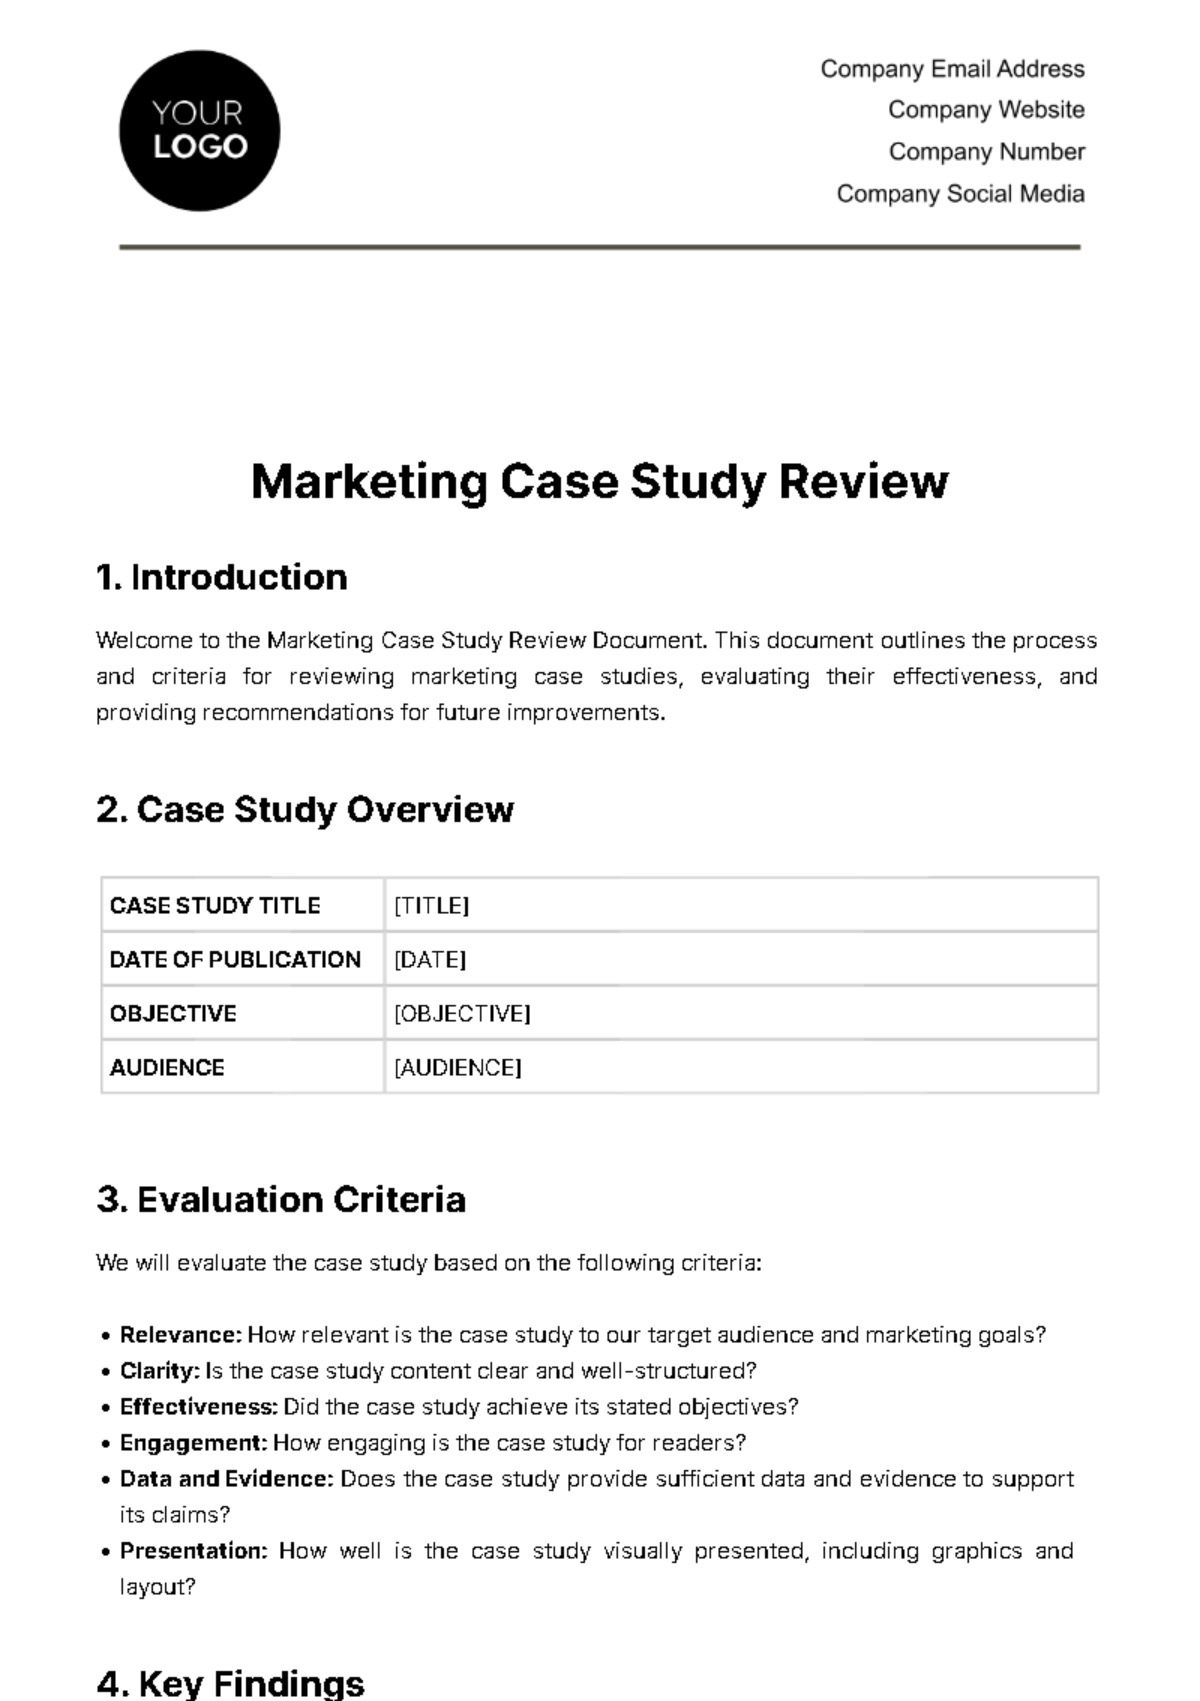 Free Marketing Case Study Review Template